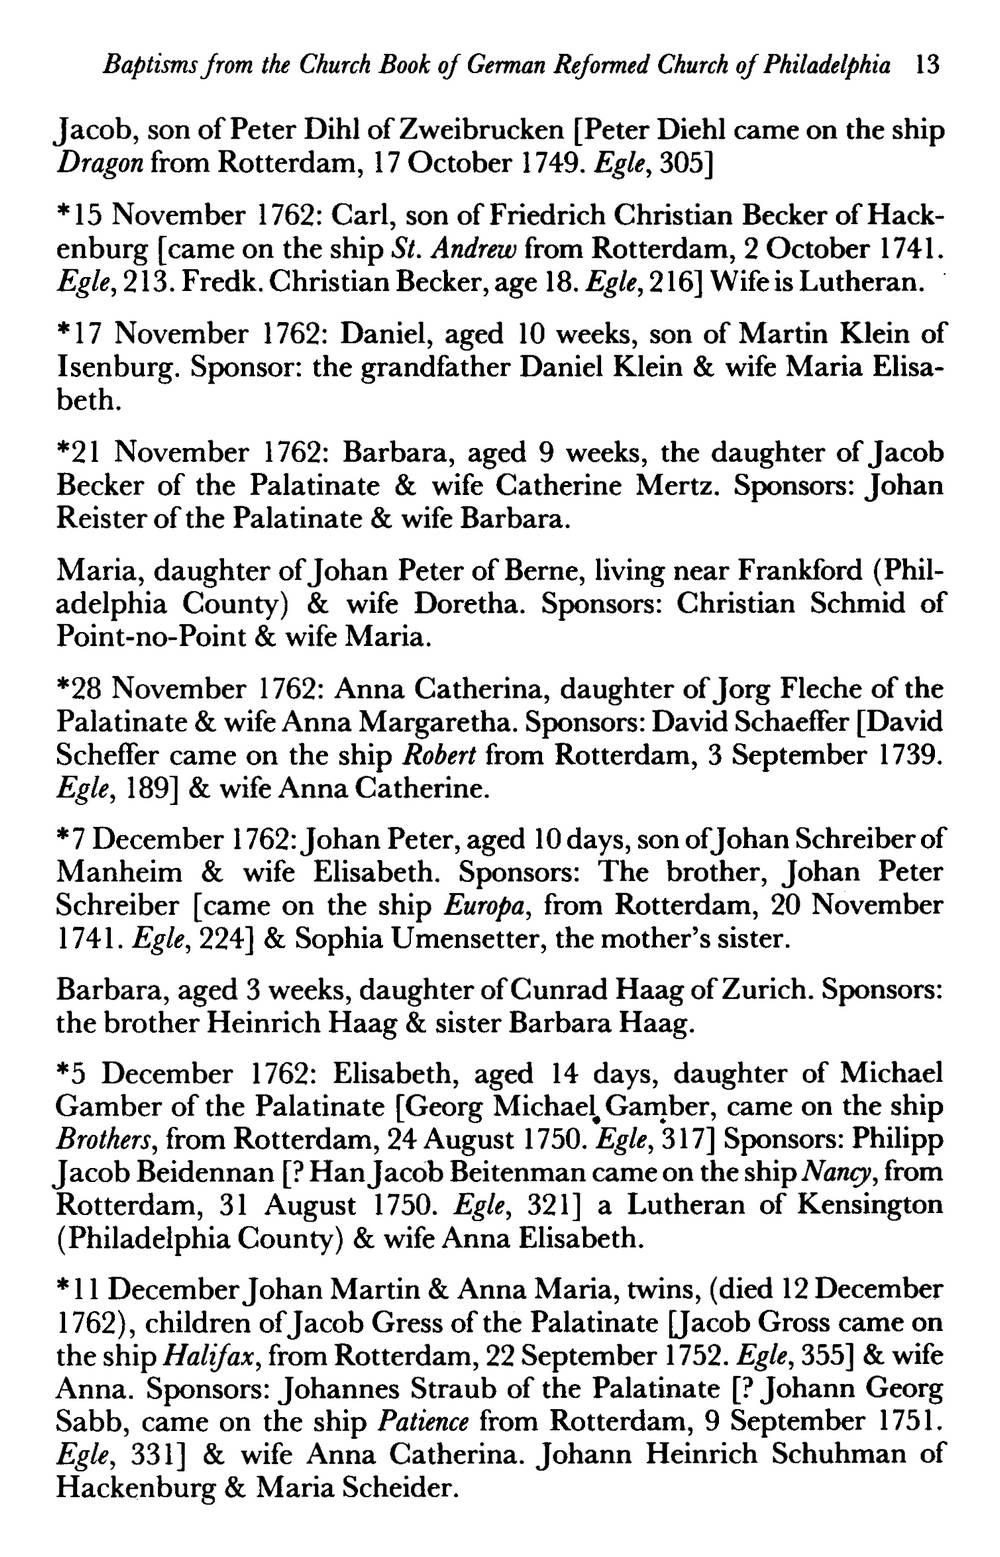 Baptisms from the Church Book of German Reformed Church of Philadelphia 13 Jacob, son of Peter Dihl of Zweibrucken [Peter Diehl came on the ship Dragon from Rotterdam, 17 October 1749.